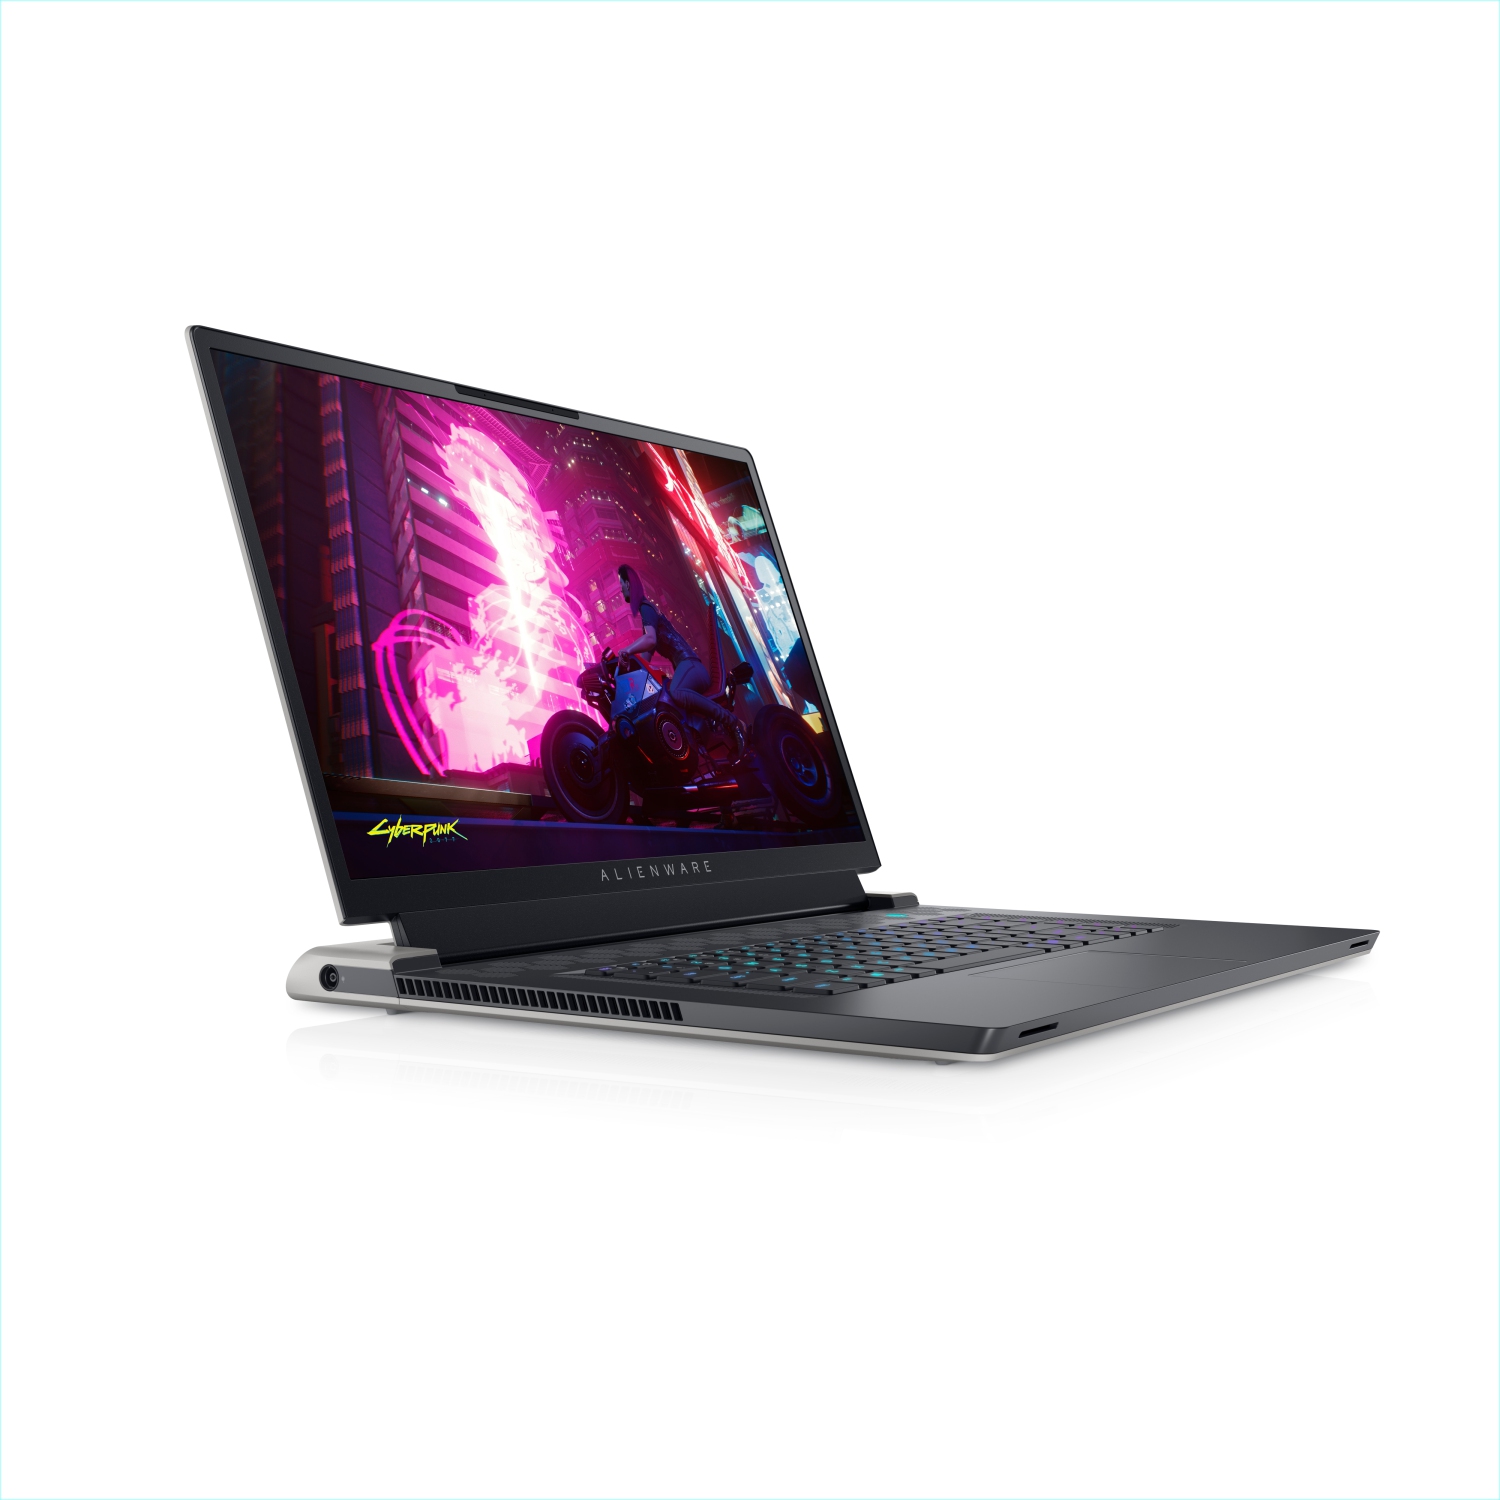 Refurbished (Excellent) - Dell Alienware X17 R1 Gaming Laptop (2021), 17.3" 4K, Core i9, 2TB SSD, 64GB RAM, RTX 3080, 8 Cores @ 5 GHz, 11th Gen CPU Certified Refurbished